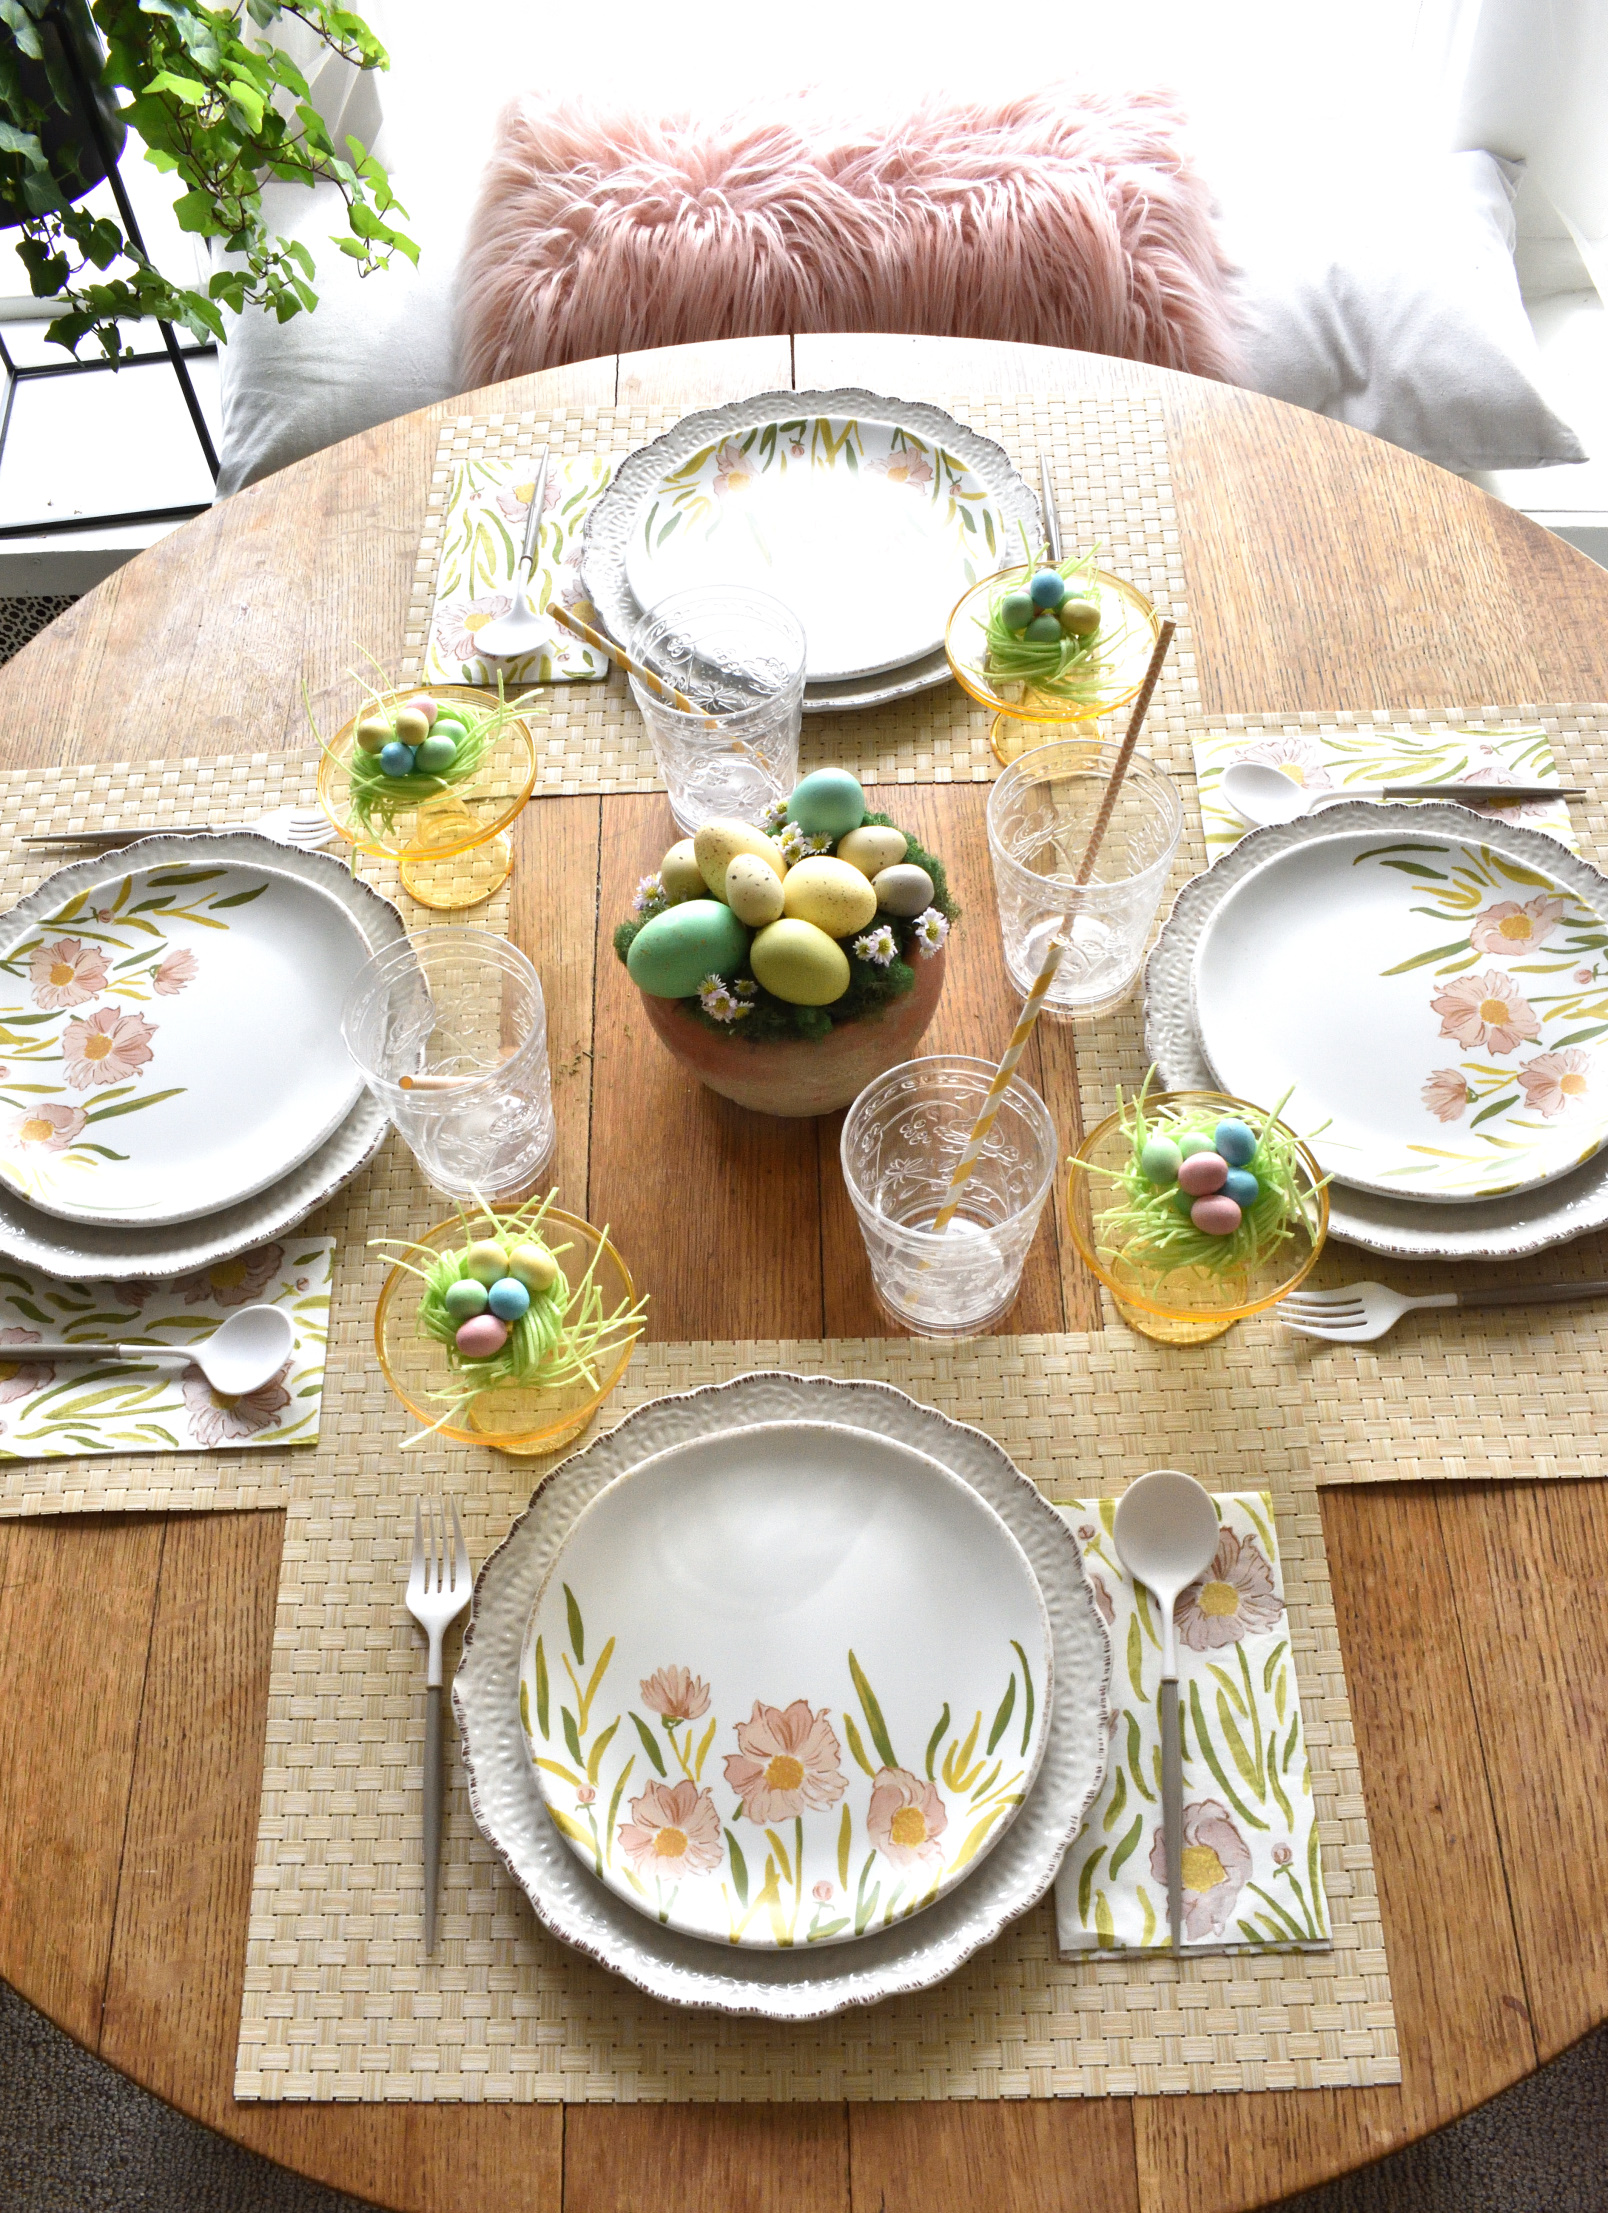 setting a spring table for Easter